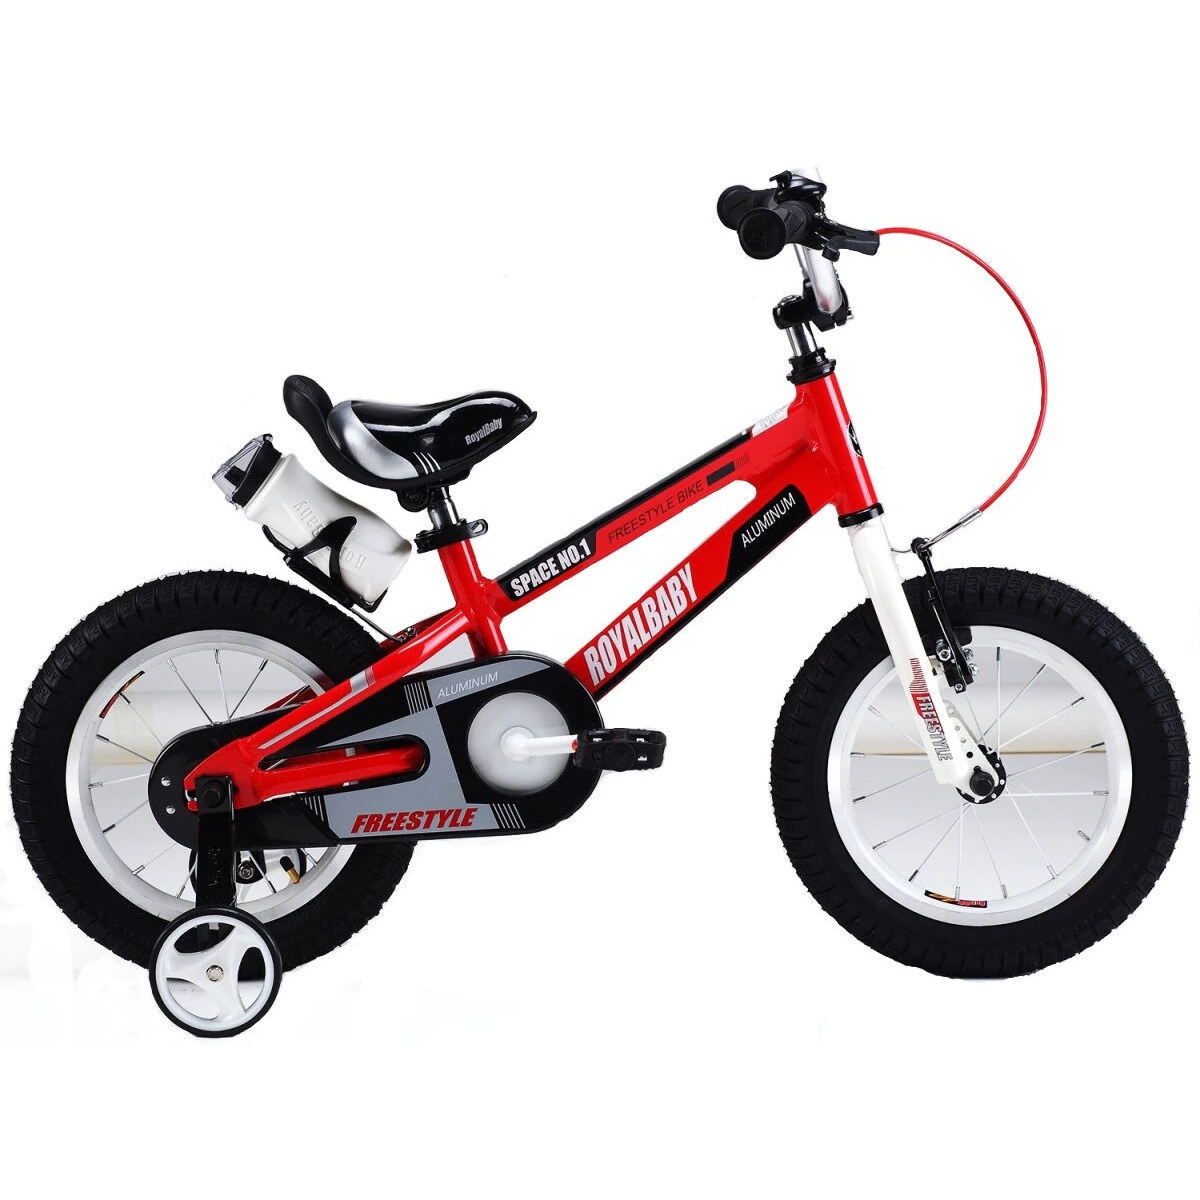    Royal Baby Freestyle Space 1 Alloy - 18  ()